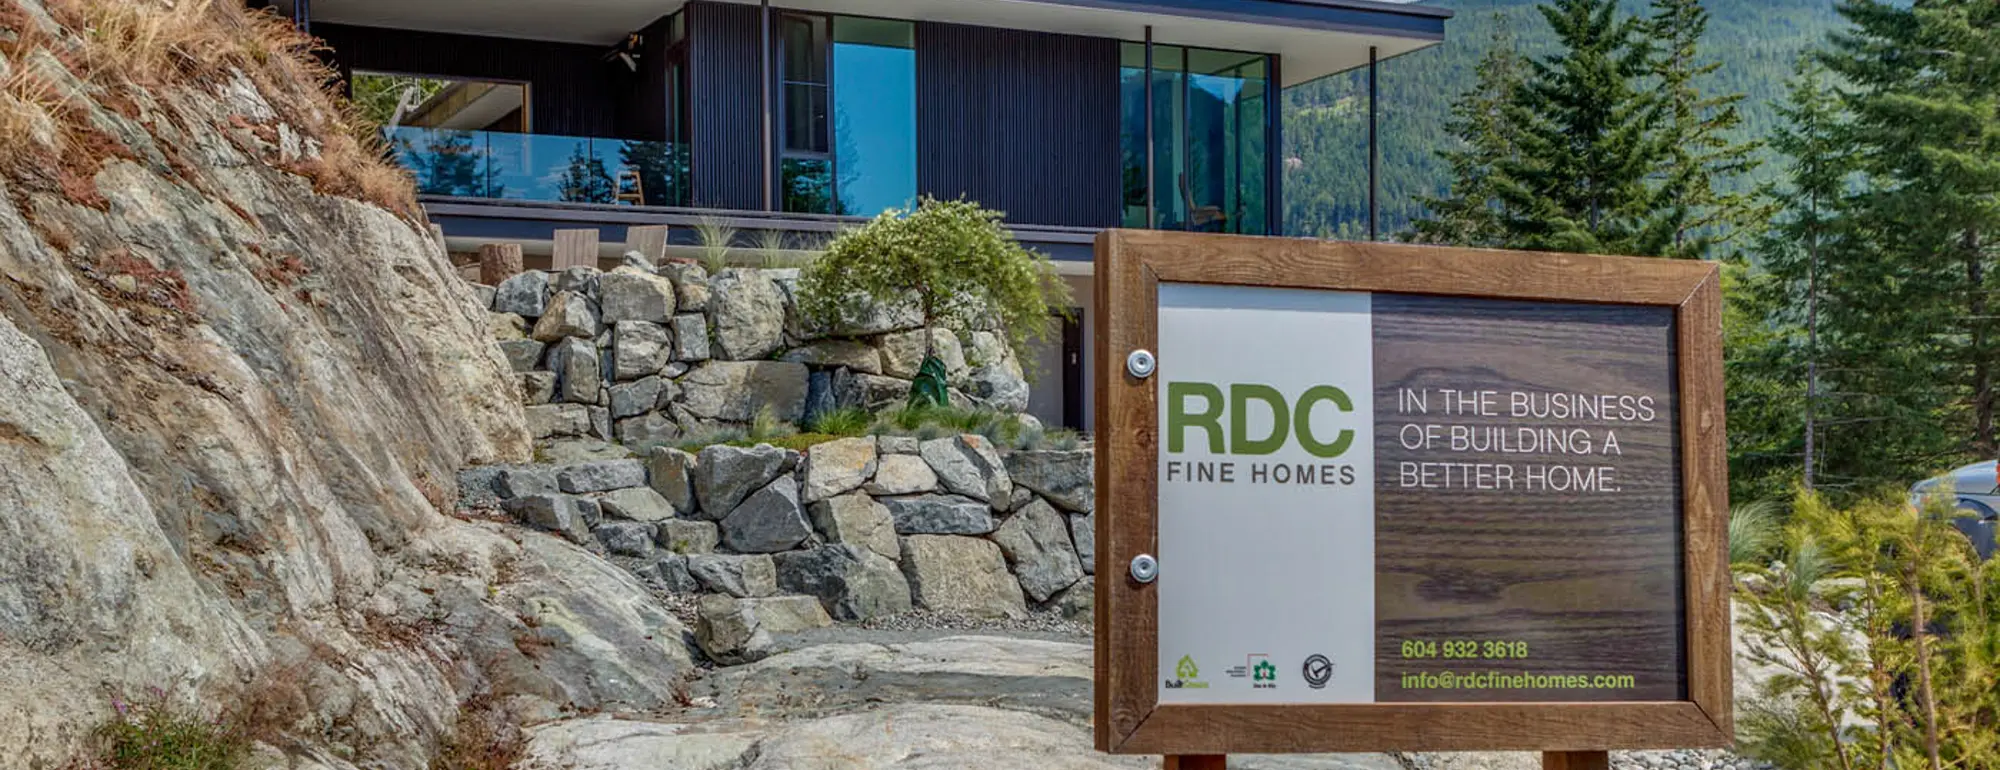 RDC Fine Homes Projects